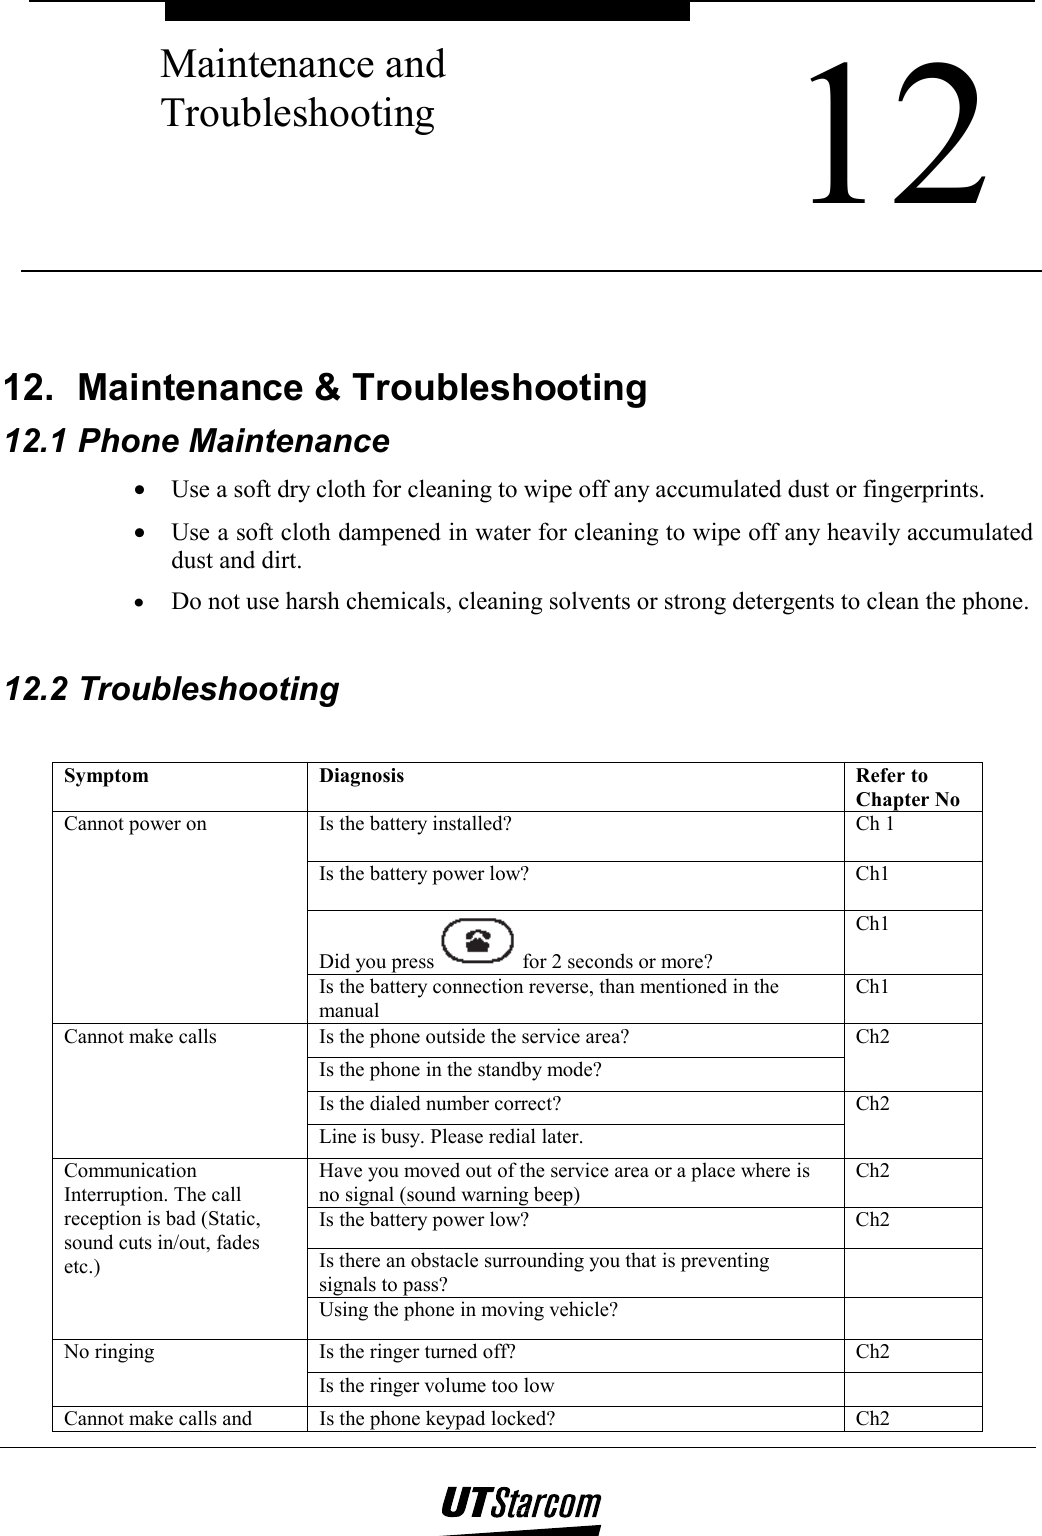  12 Maintenance and Troubleshooting    12. Maintenance &amp; Troubleshooting 12.1 Phone Maintenance •  Use a soft dry cloth for cleaning to wipe off any accumulated dust or fingerprints. •  Use a soft cloth dampened in water for cleaning to wipe off any heavily accumulated dust and dirt. •  Do not use harsh chemicals, cleaning solvents or strong detergents to clean the phone.  12.2 Troubleshooting  Symptom Diagnosis  Refer to Chapter No Is the battery installed?  Ch 1 Is the battery power low?  Ch1 Did you press   for 2 seconds or more? Ch1 Cannot power on Is the battery connection reverse, than mentioned in the manual Ch1 Is the phone outside the service area? Is the phone in the standby mode? Ch2 Is the dialed number correct? Cannot make calls Line is busy. Please redial later. Ch2 Have you moved out of the service area or a place where is no signal (sound warning beep) Ch2 Is the battery power low?  Ch2 Is there an obstacle surrounding you that is preventing signals to pass?  Communication  Interruption. The call reception is bad (Static, sound cuts in/out, fades etc.) Using the phone in moving vehicle?   Is the ringer turned off?  Ch2 No ringing Is the ringer volume too low   Cannot make calls and  Is the phone keypad locked?  Ch2 